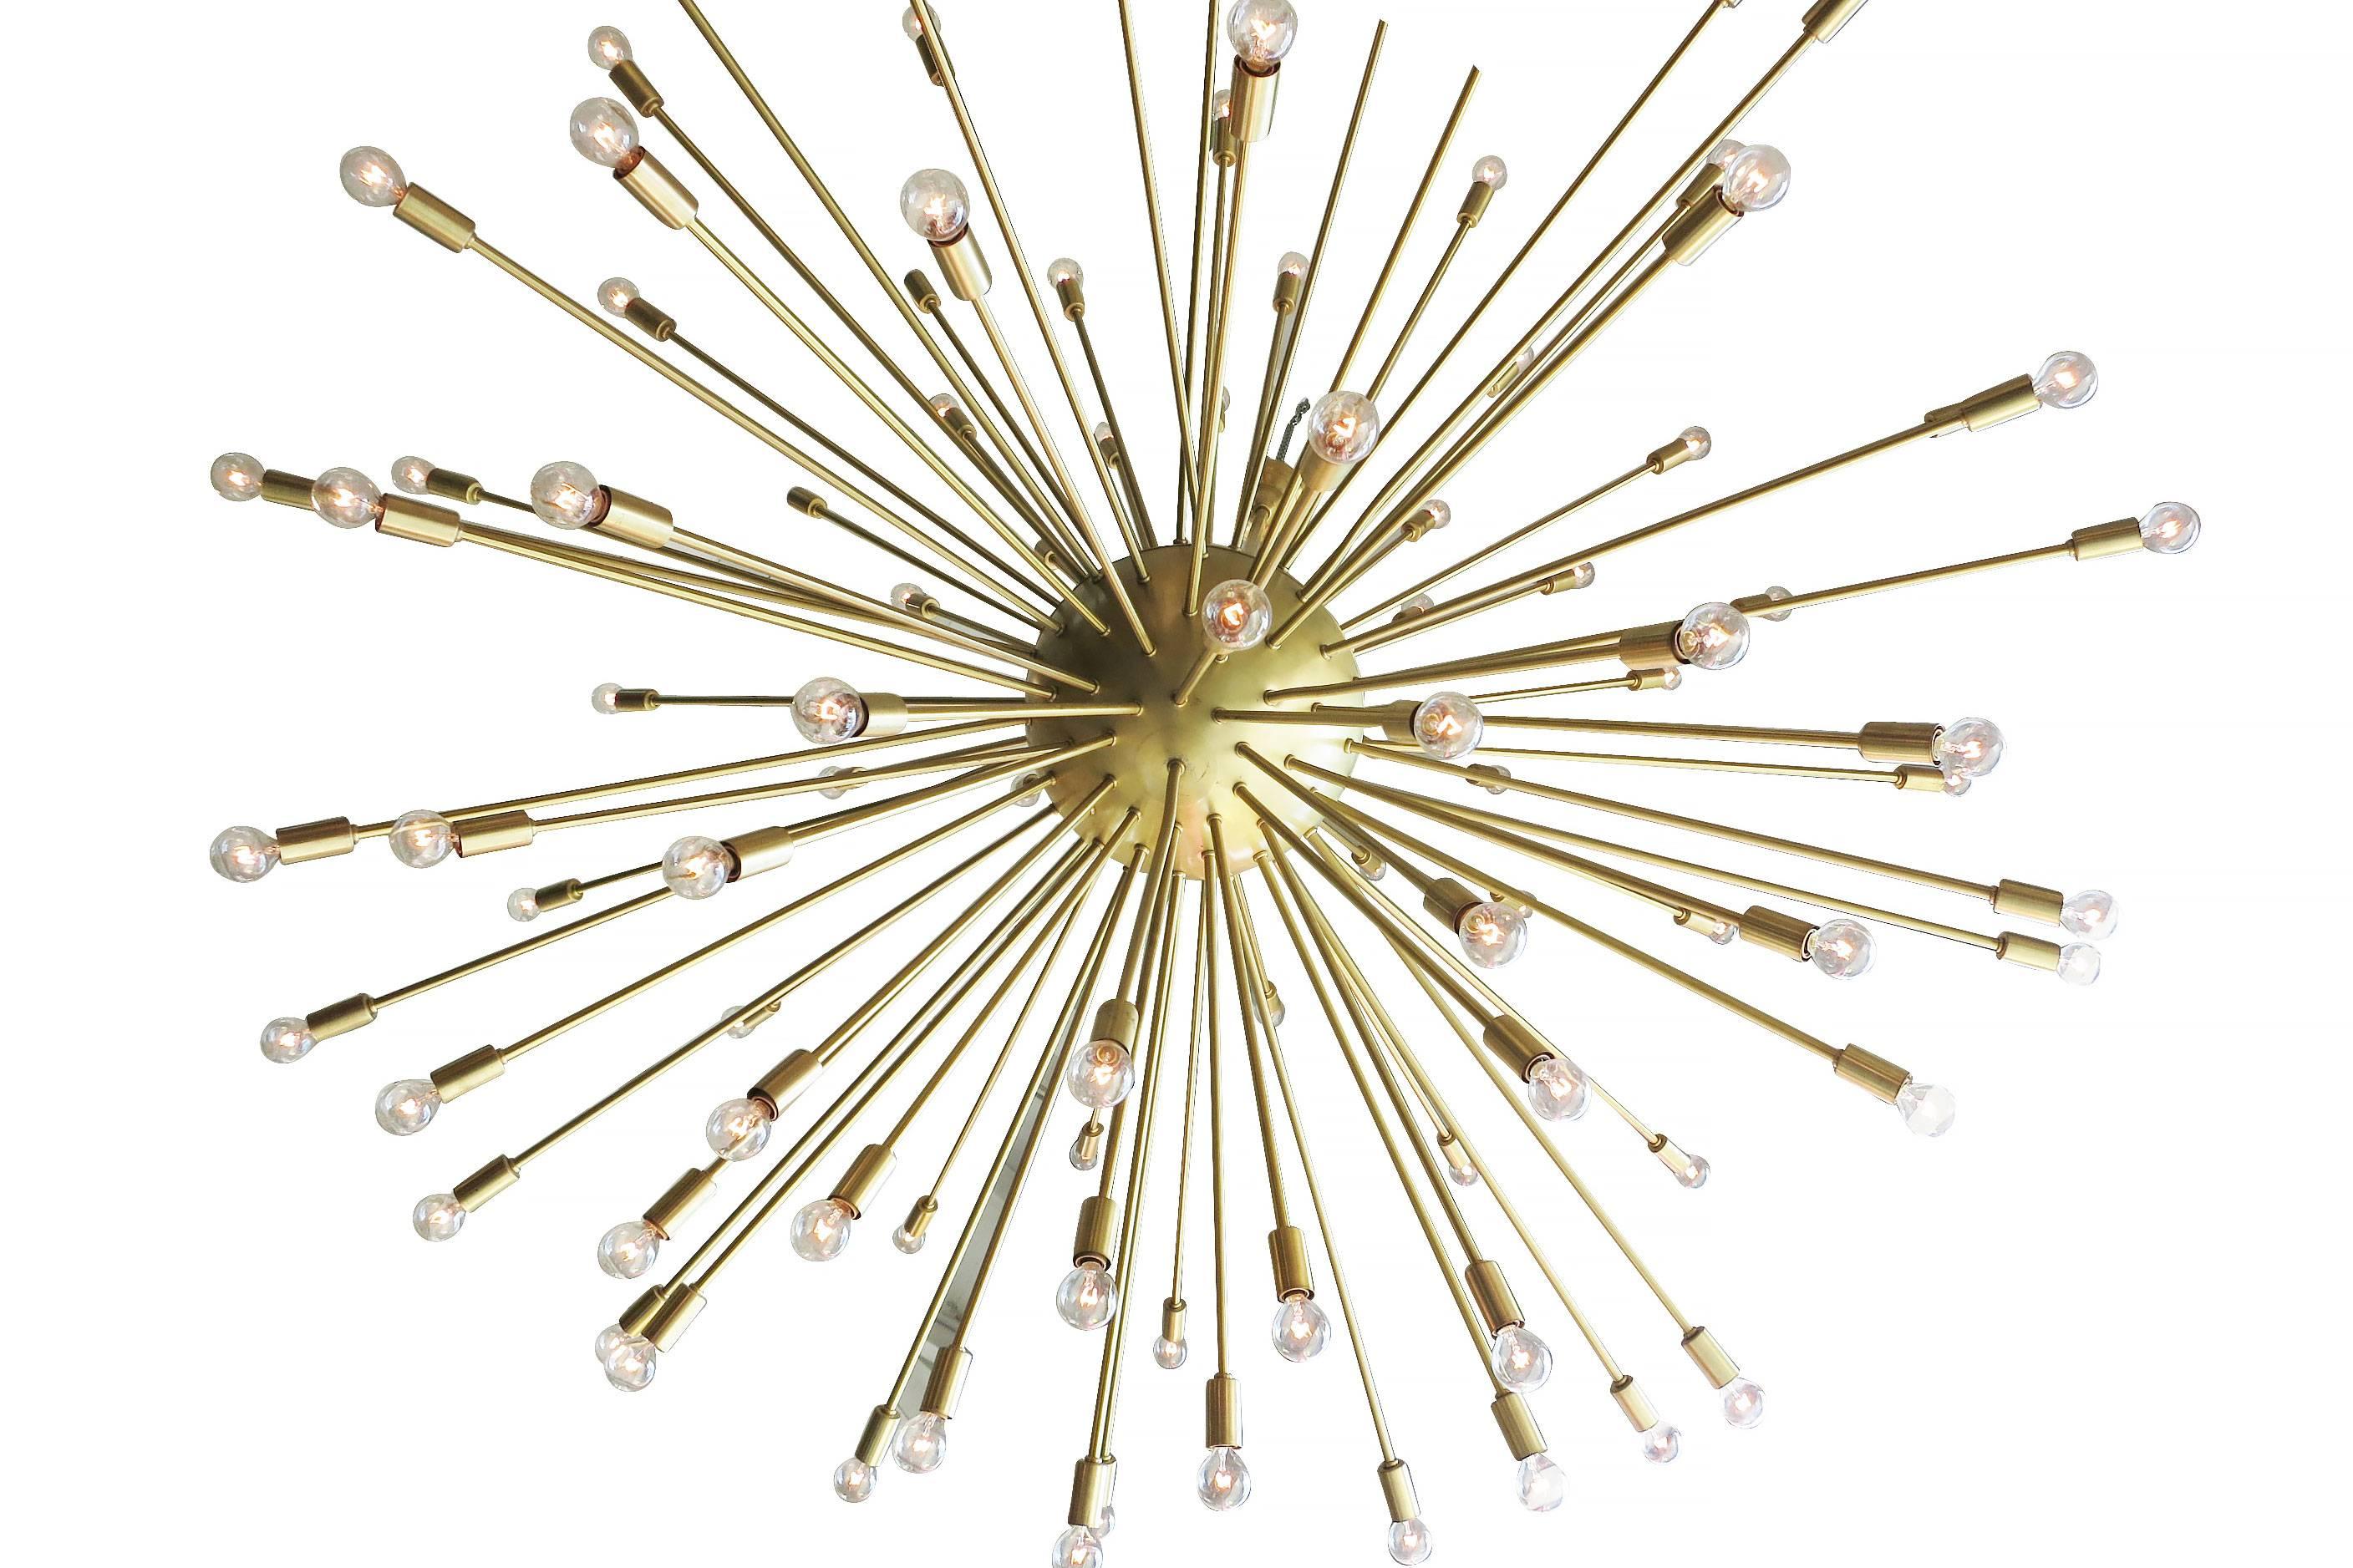 Large 6-foot Mid-Century Modern style Sputnik chandelier consisting of over a 100 brass rods that extend from its brass center point with each rod having its own light socket.

It is suspended from a brass dome canopy and rod. It has been newly made